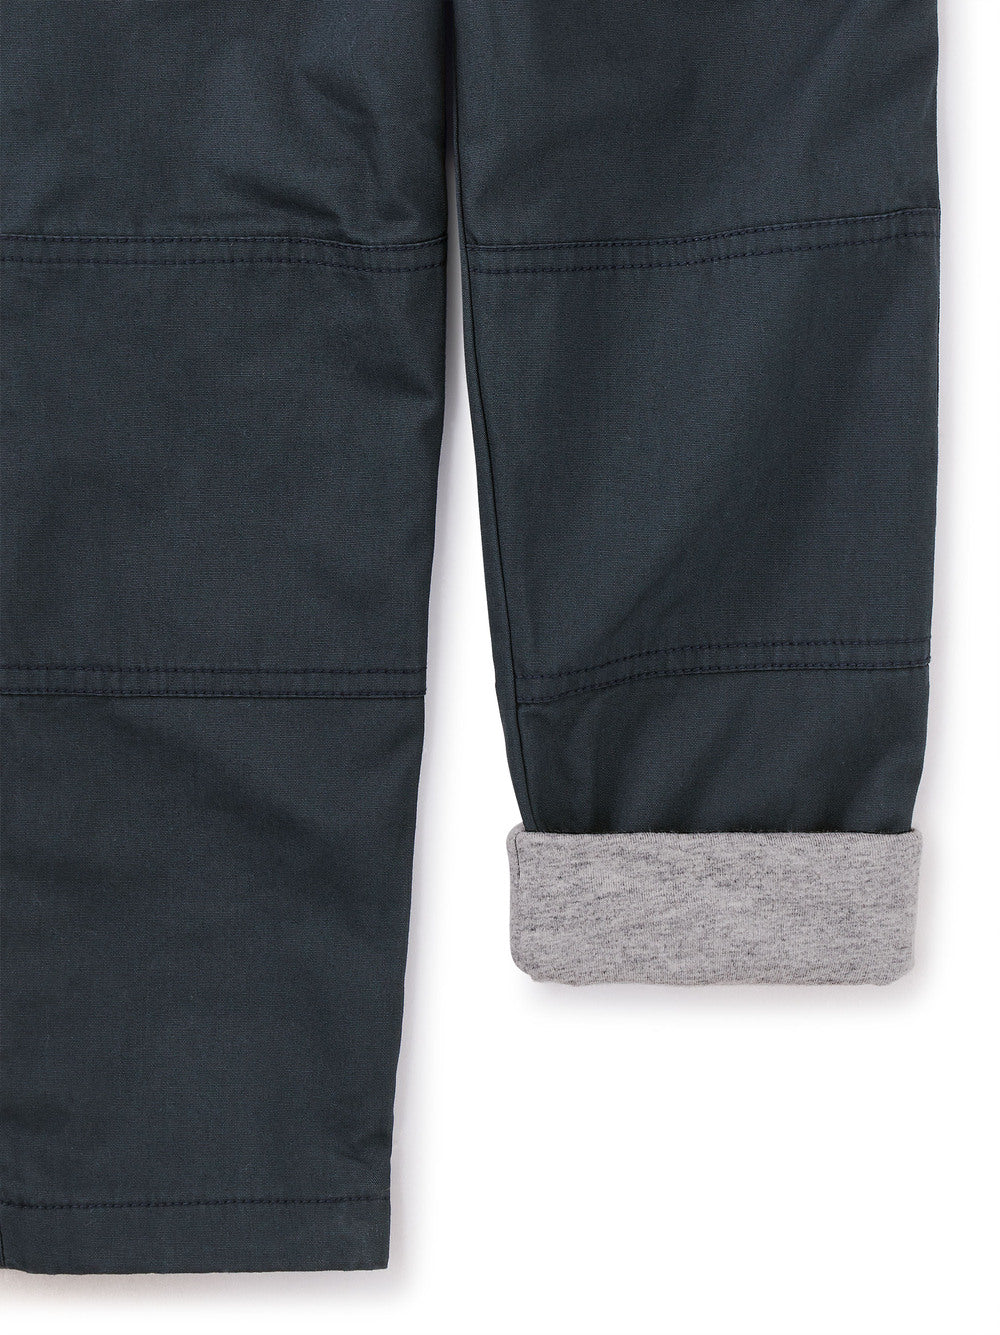 Cozy Does It Lined Pants: Indigo